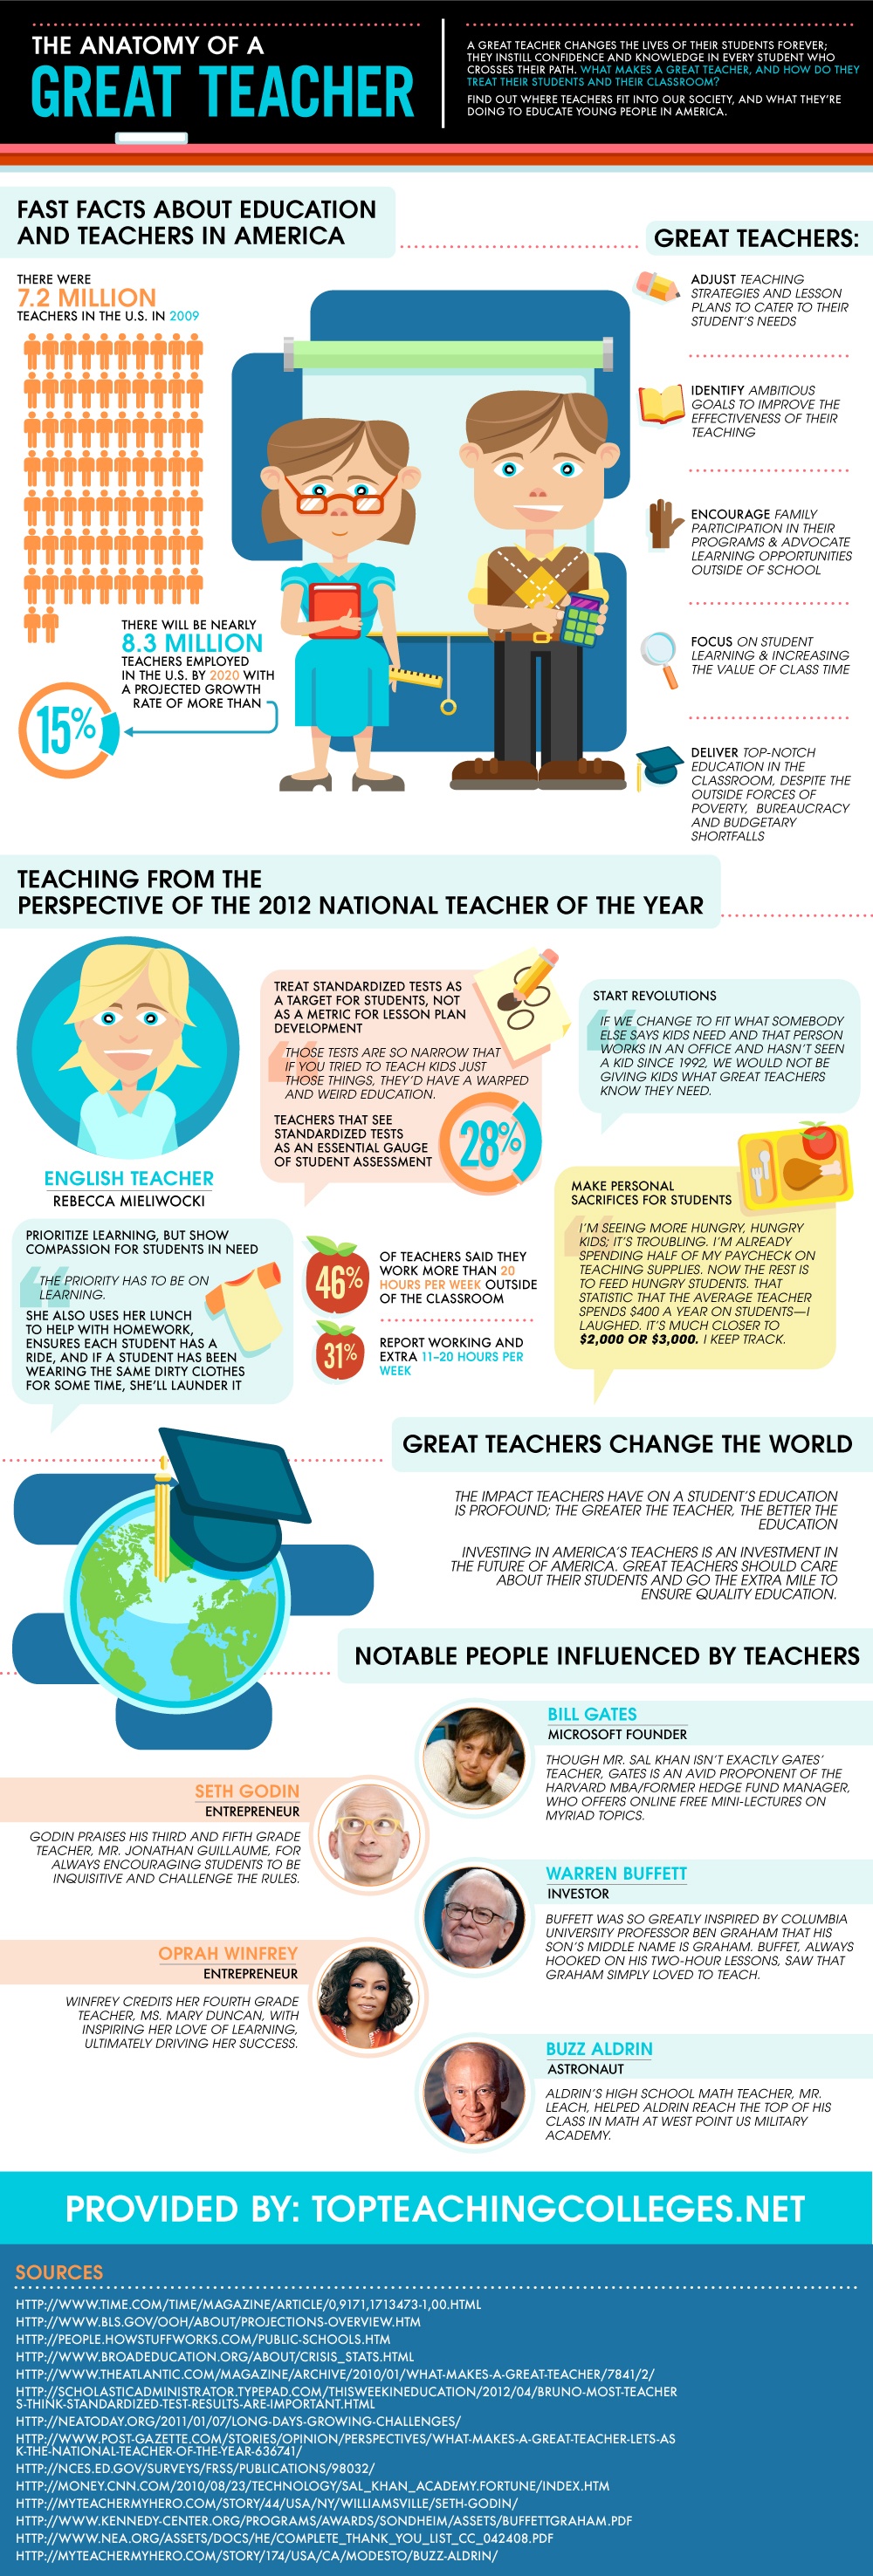 The Making of a Great Teacher